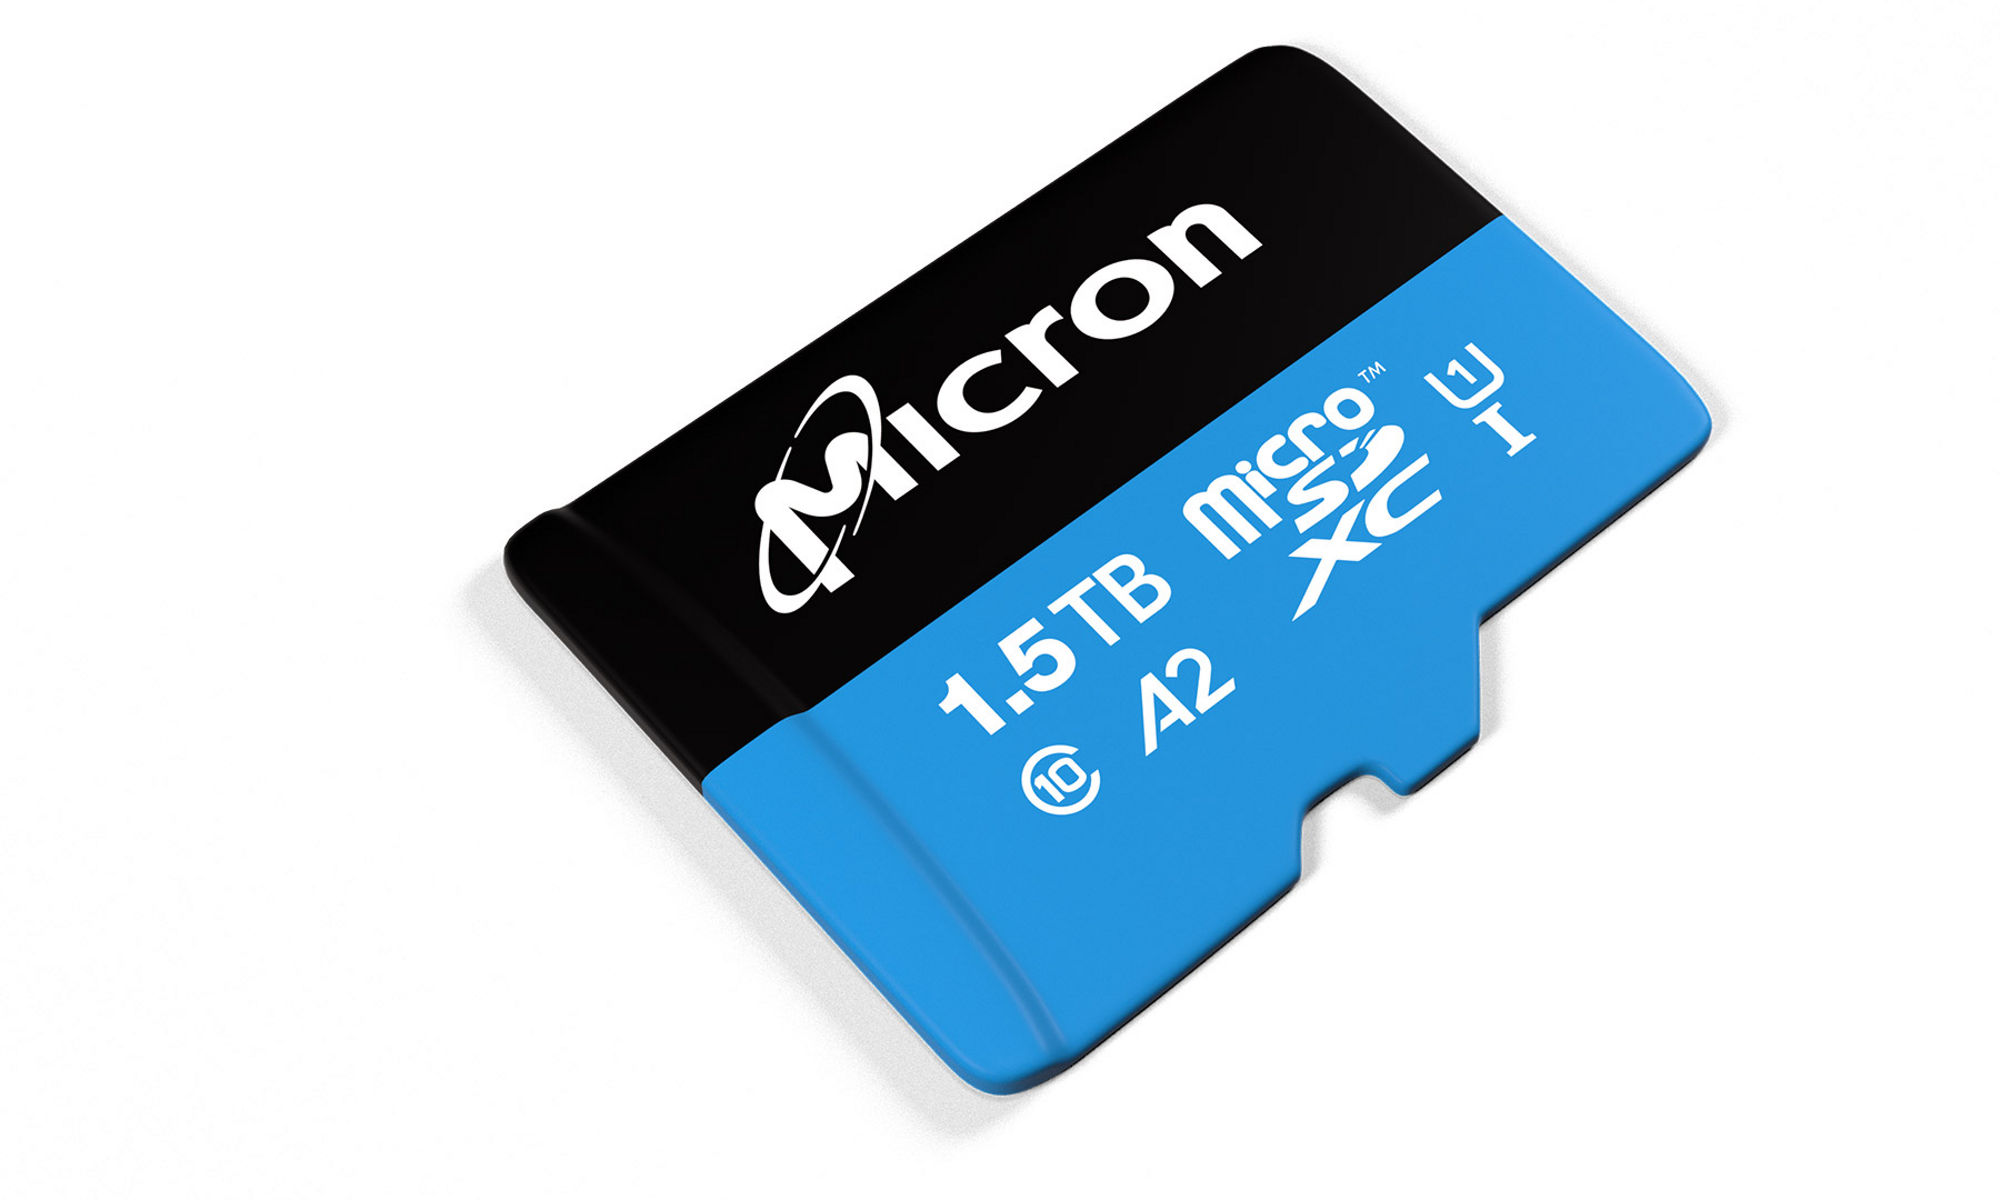 Micron managed nand component